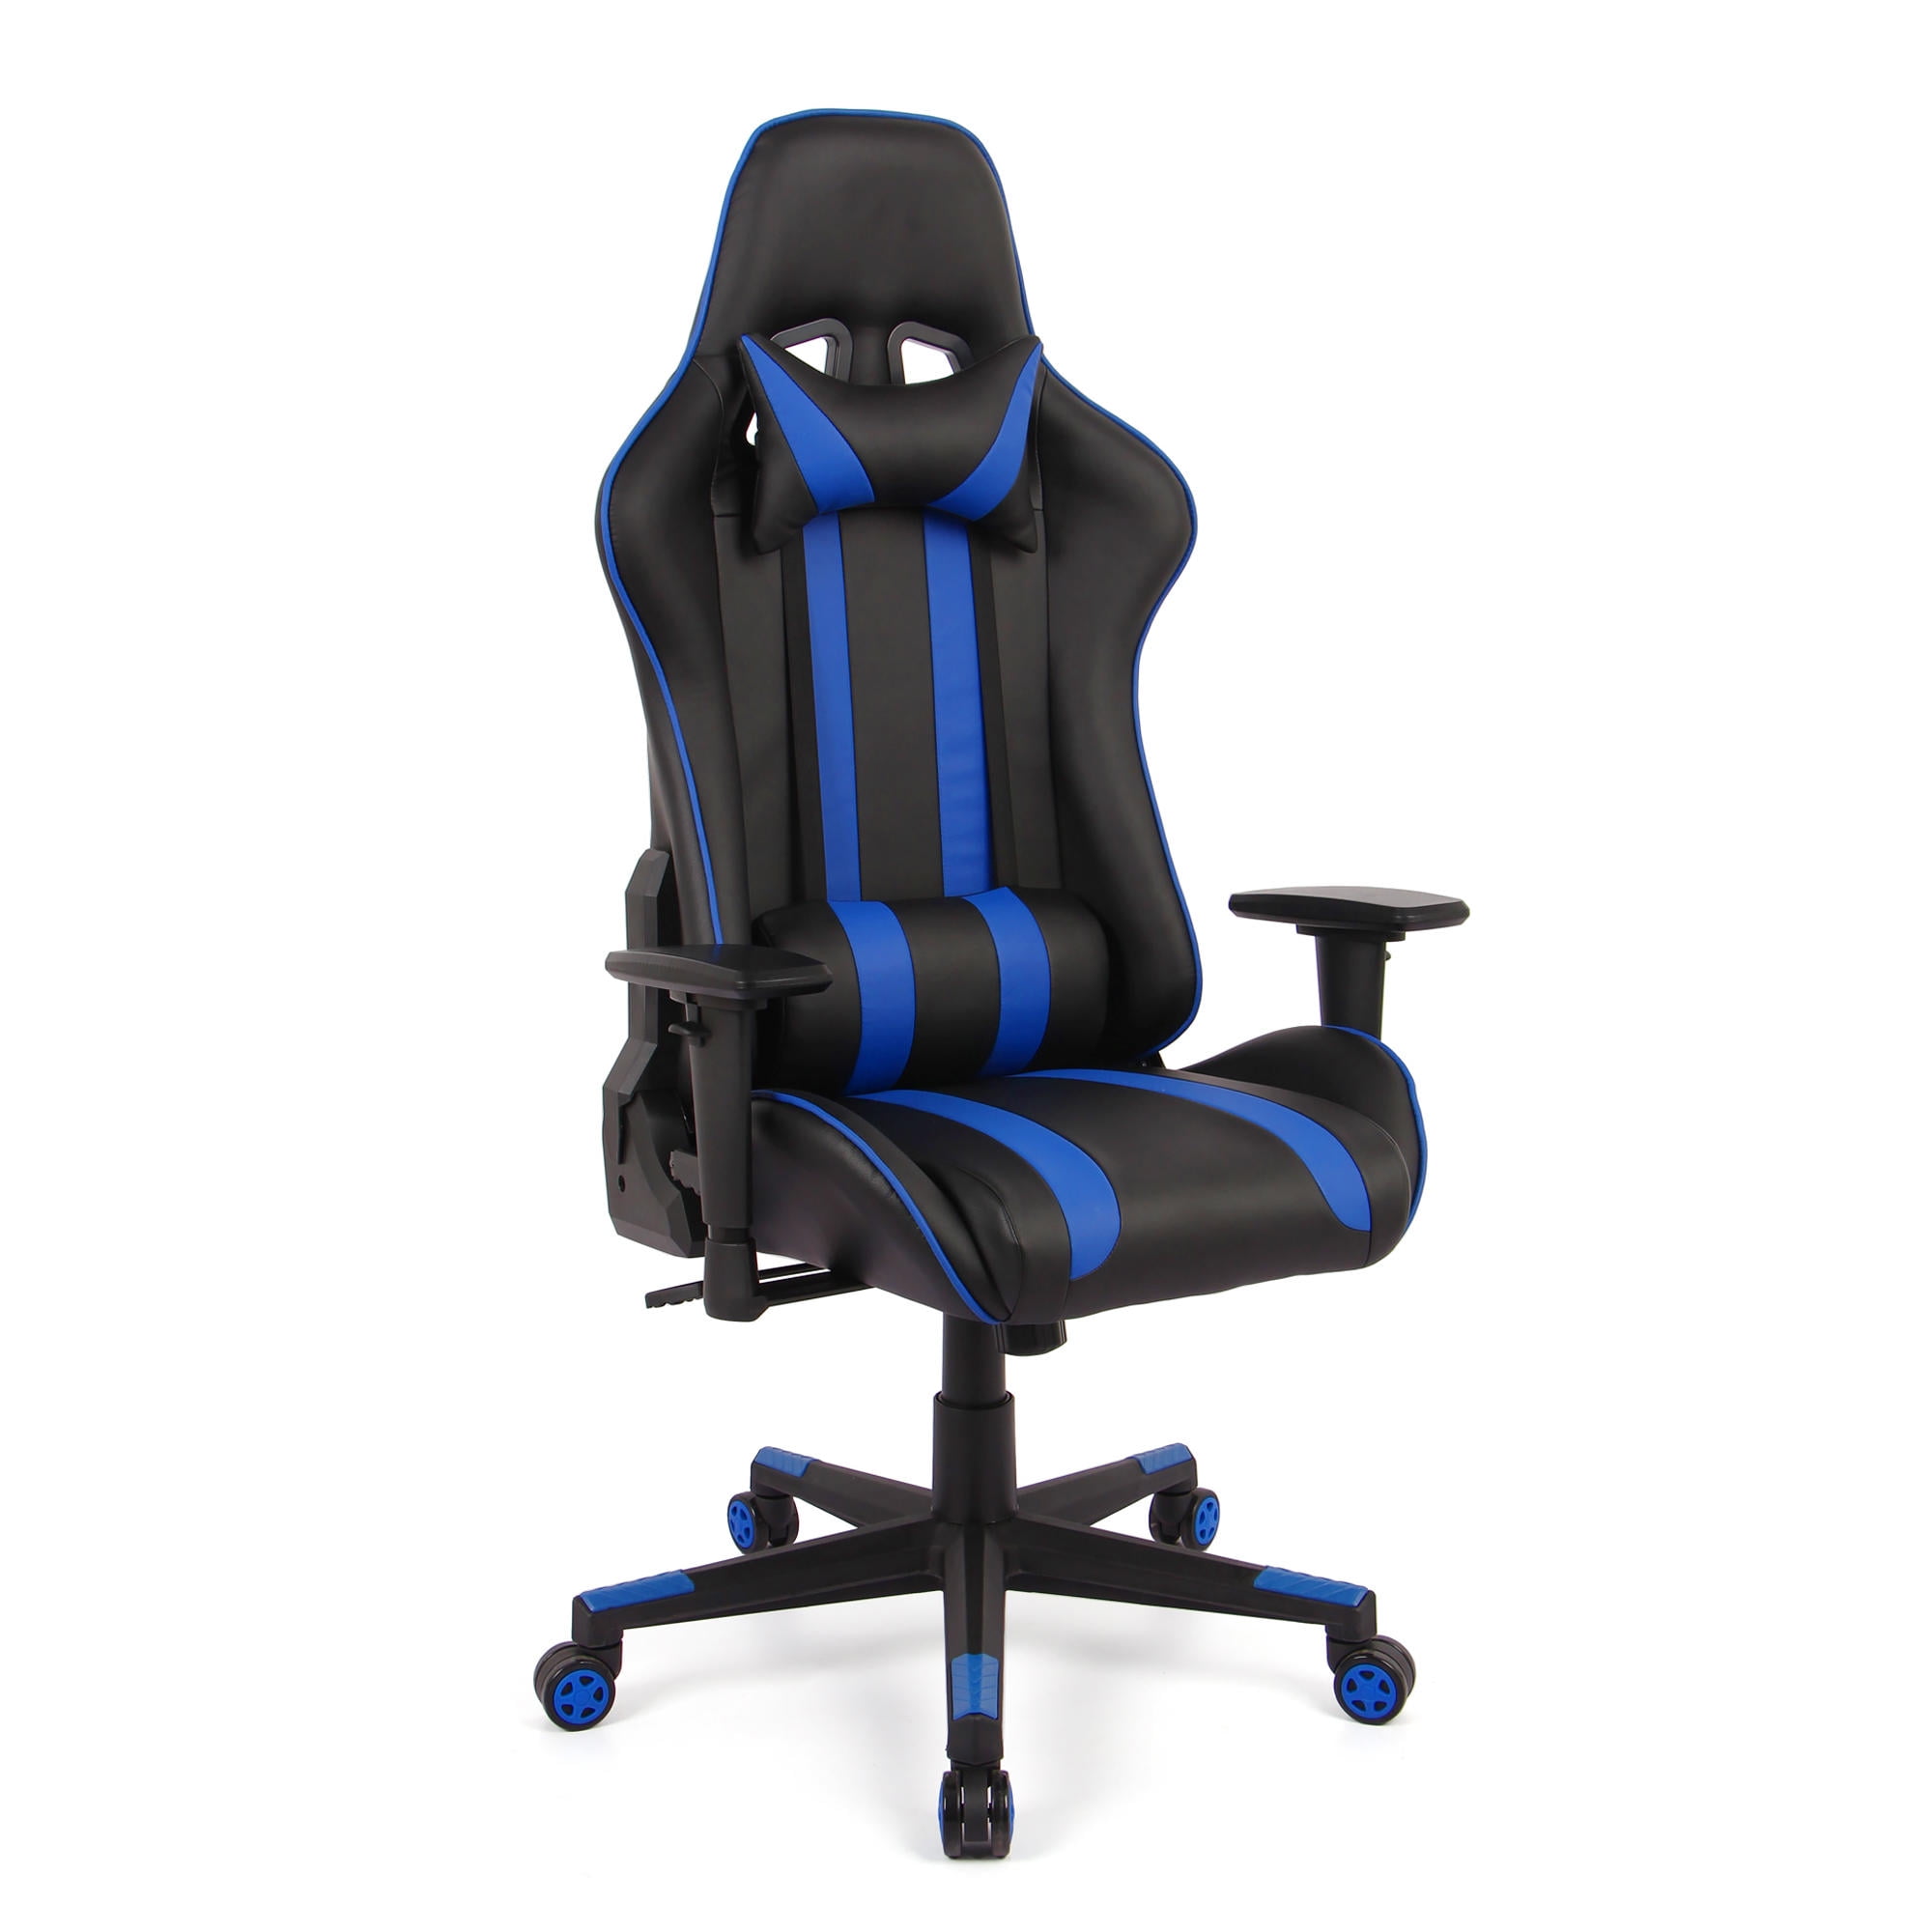 High Back Reclining Racing Gaming Chair With Removable Lumbar Support And Headrest Adjustable Seat Height Armrests Walmart Canada